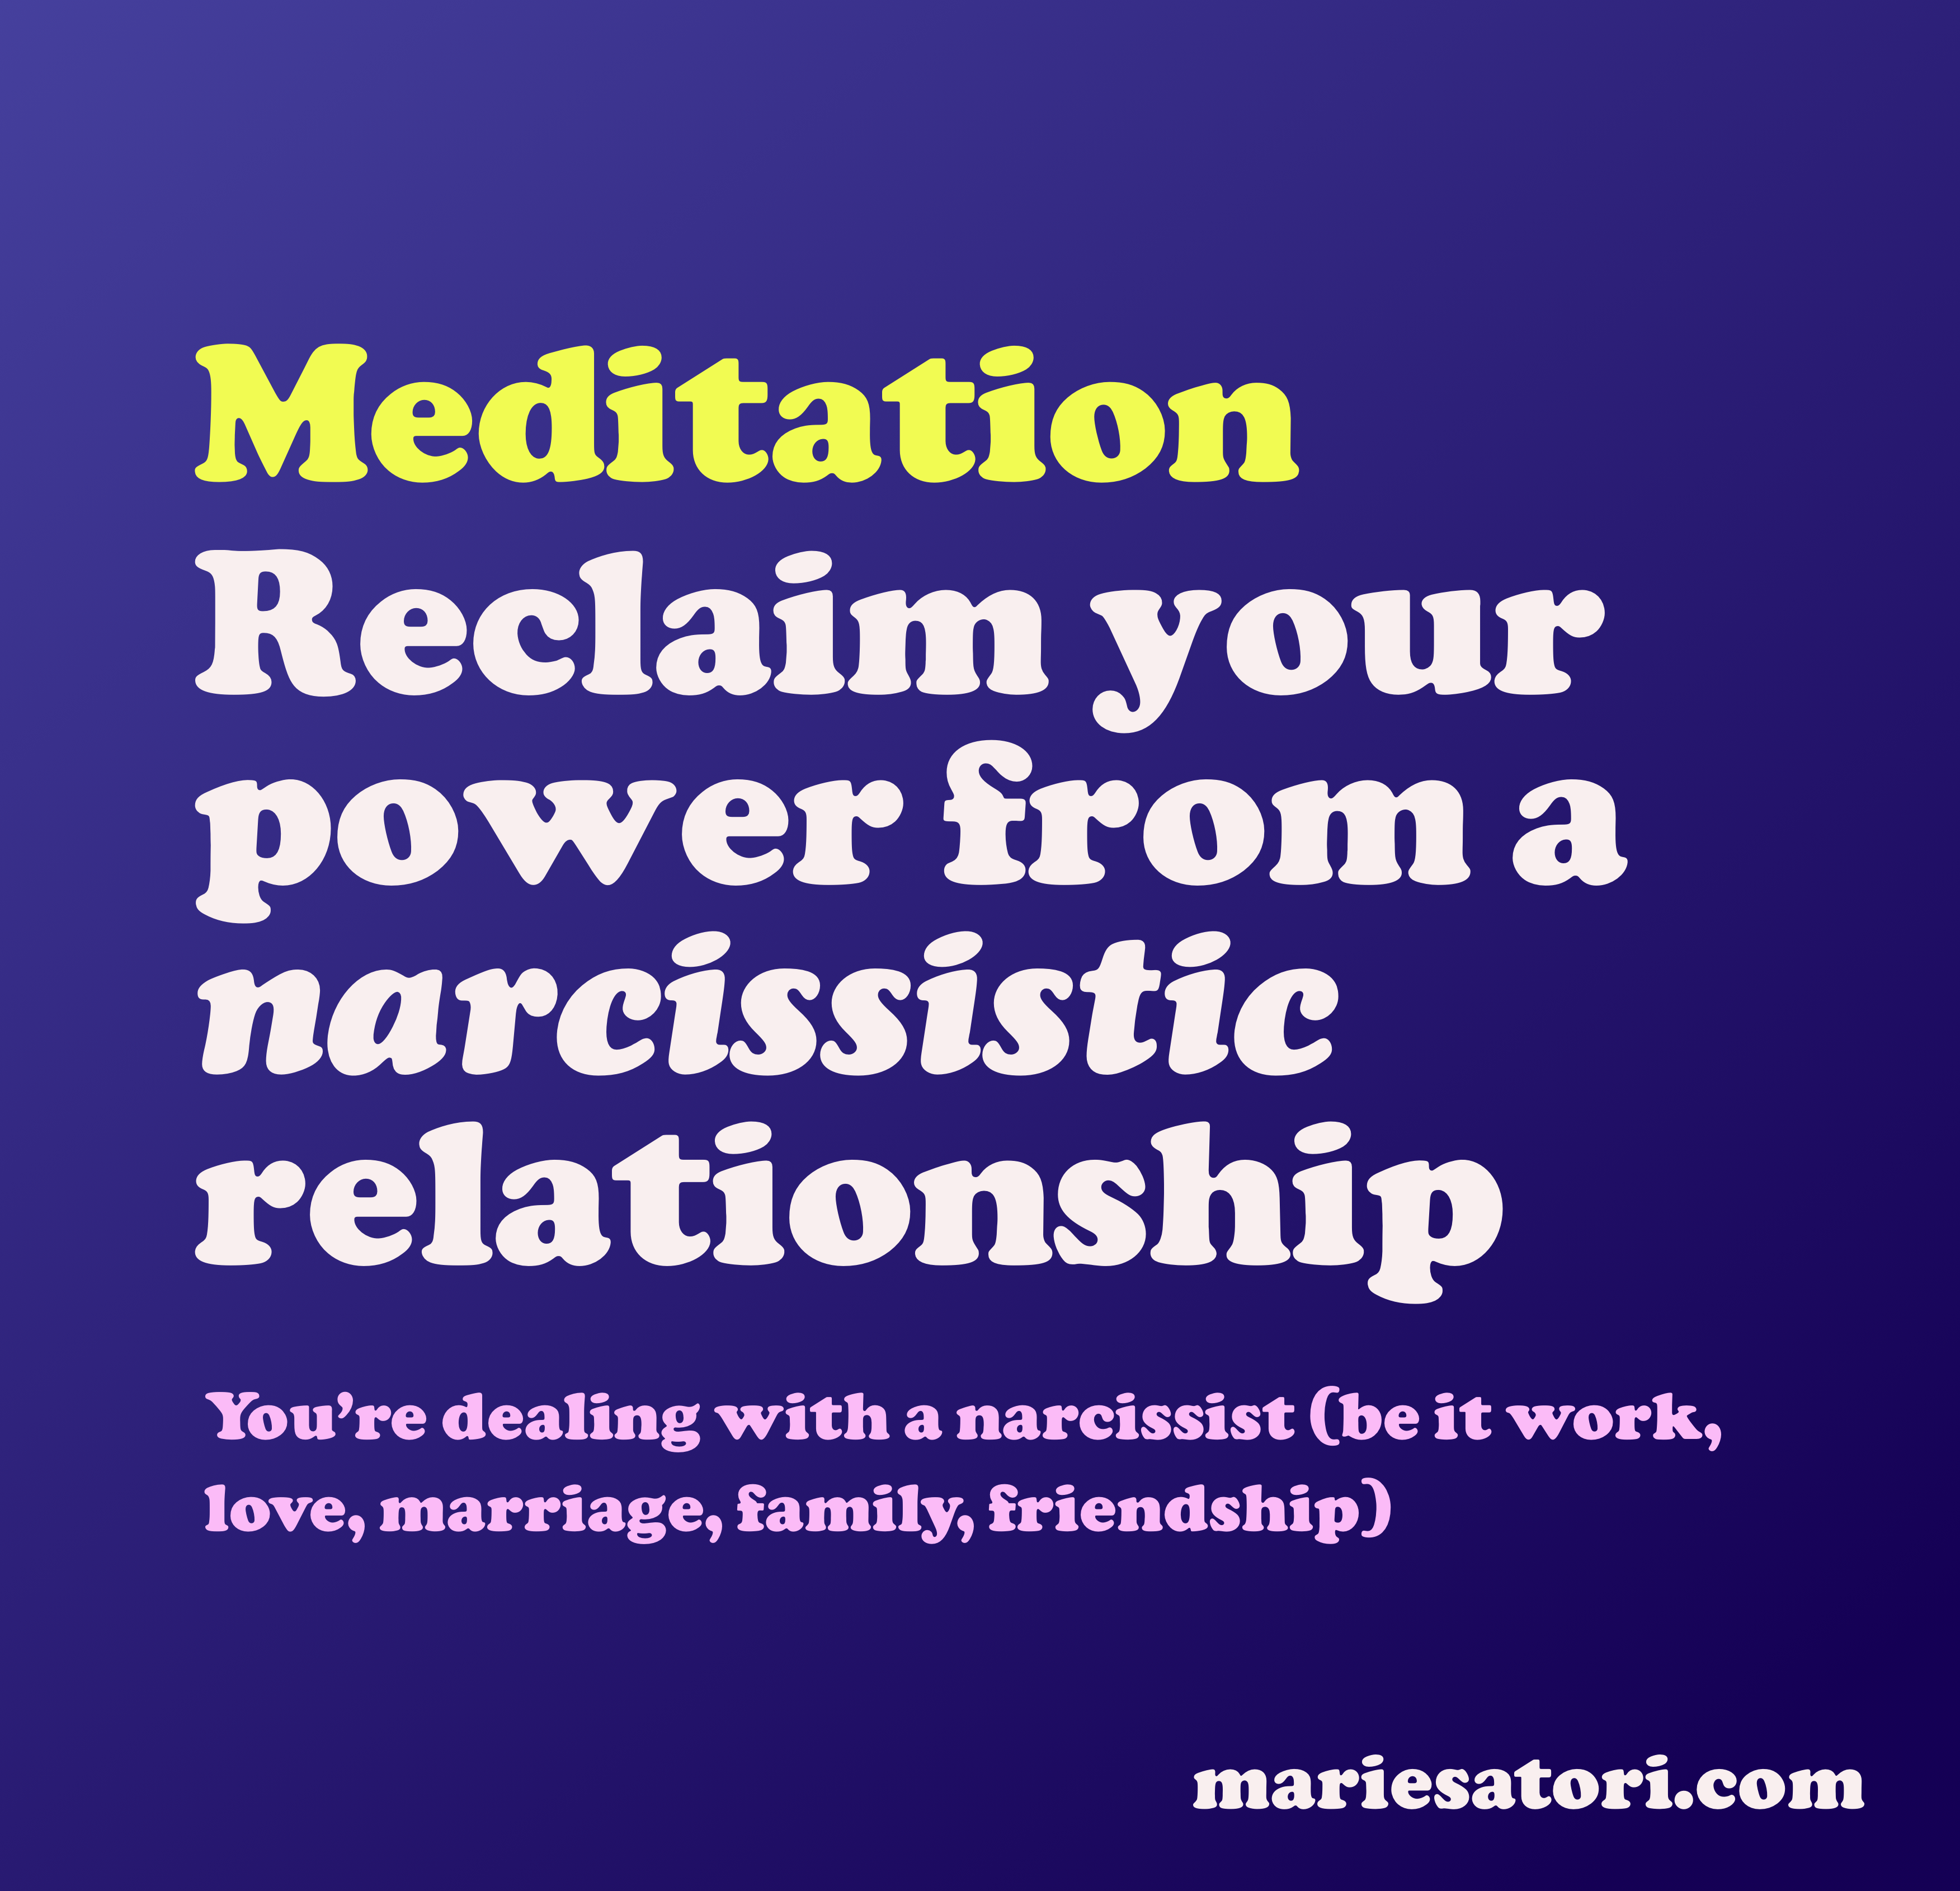 [Meditation] Reclaim your power from a narcissistic relationship